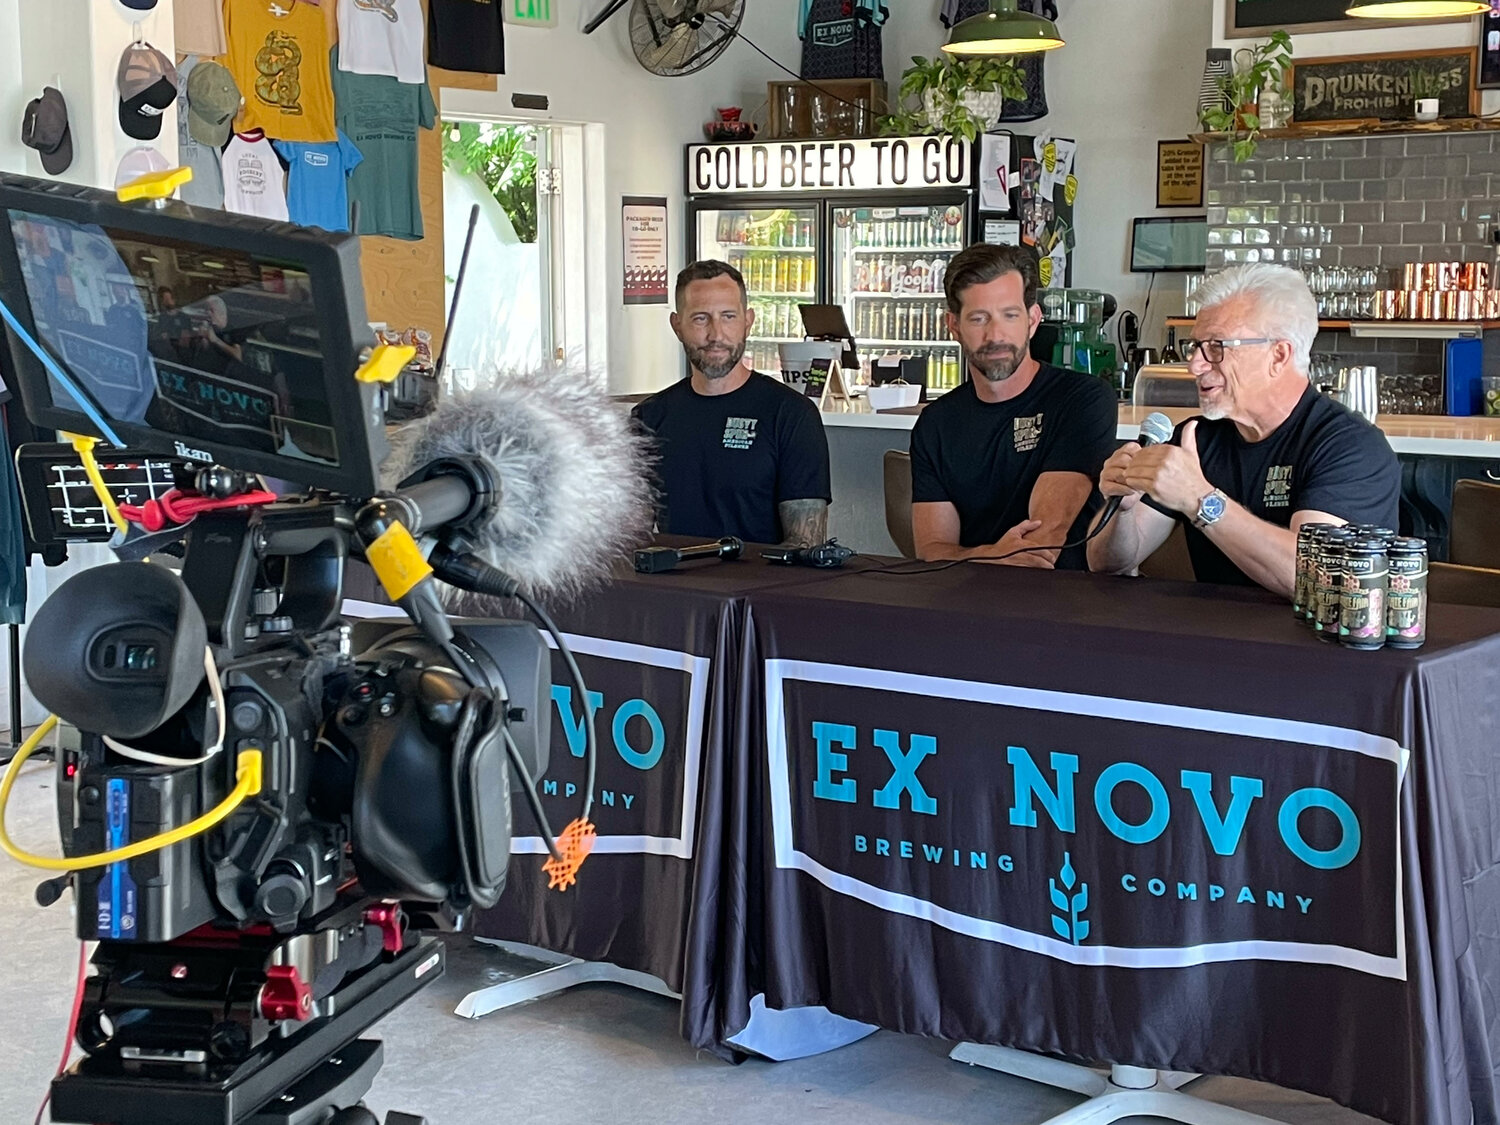 From left, James Gregory, Joel Gregory of Ex Novo and Dan Mourning, General Manager of Expo New Mexico, announced Ex Novo's latest beet, Dusty Spur, will be the official craft beer of this year's New Mexico State Fair. (T.S. Last/Corrales Comment)